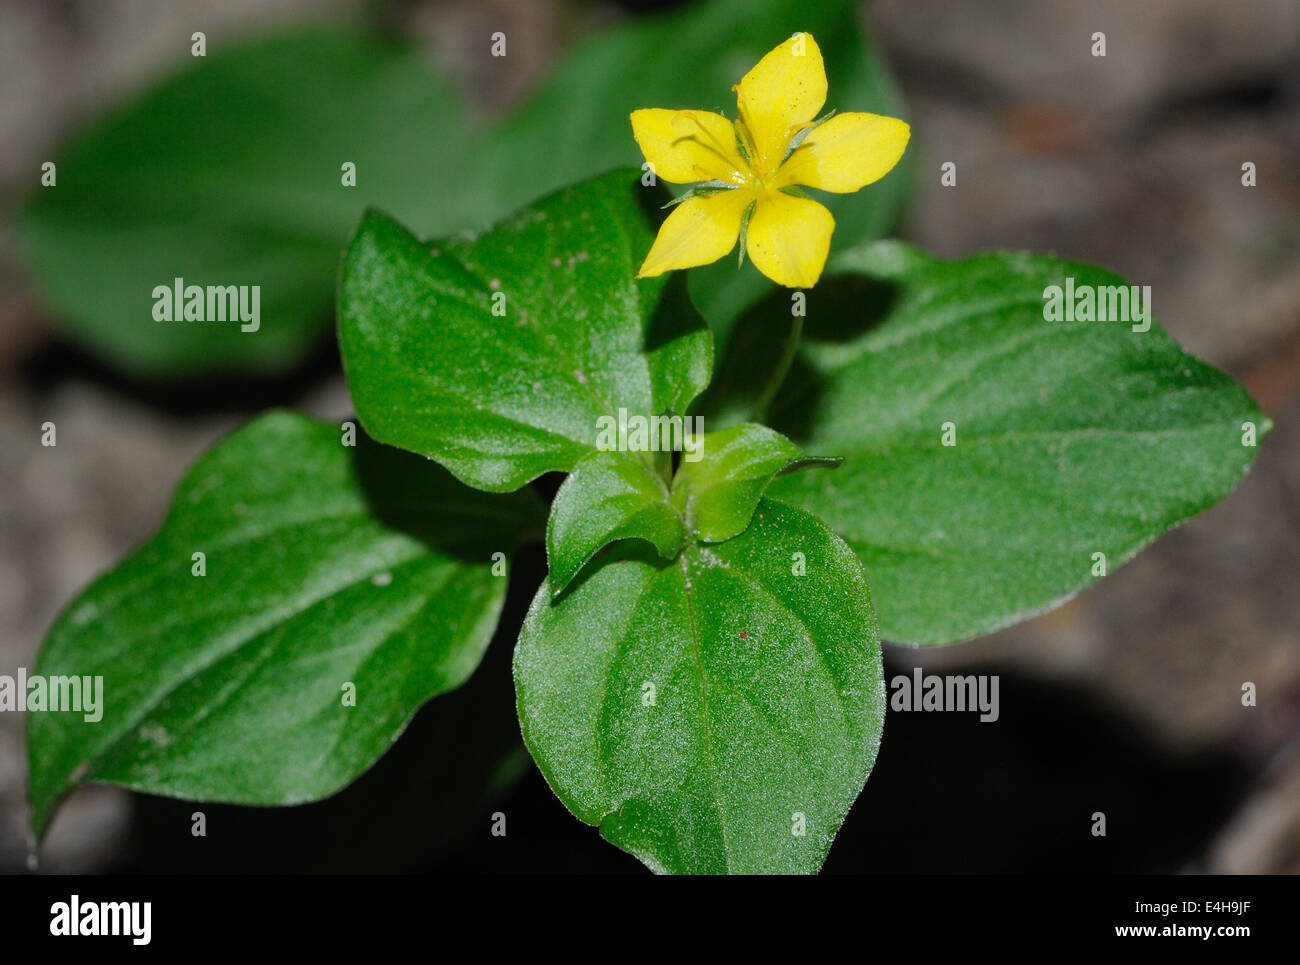 Yellow Pimpernel (Lysimachia nemorum) growing on a  shady forest floor. Bedgebury Forest, Kent, UK. Stock Photo